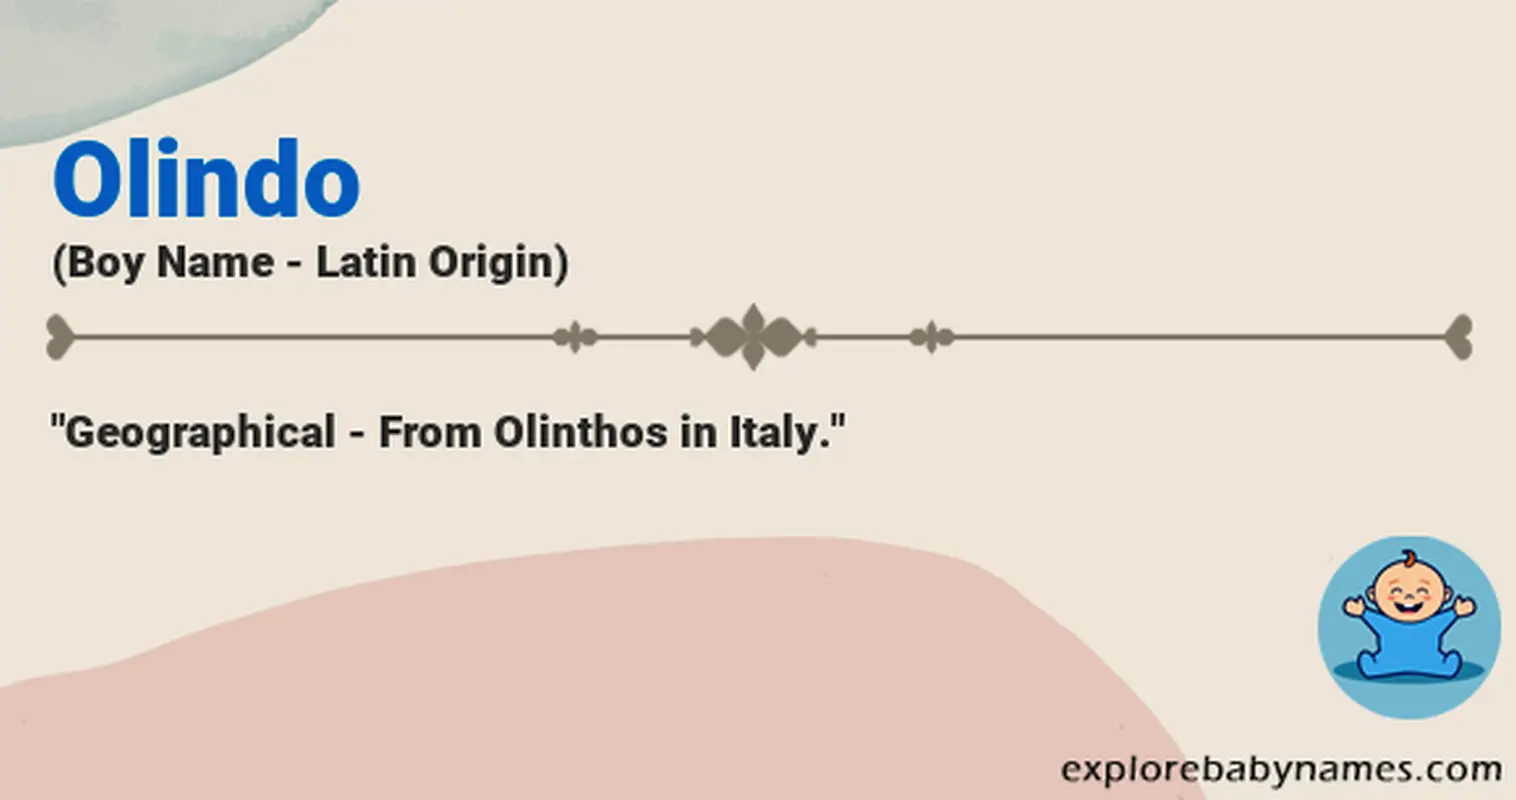 Meaning of Olindo